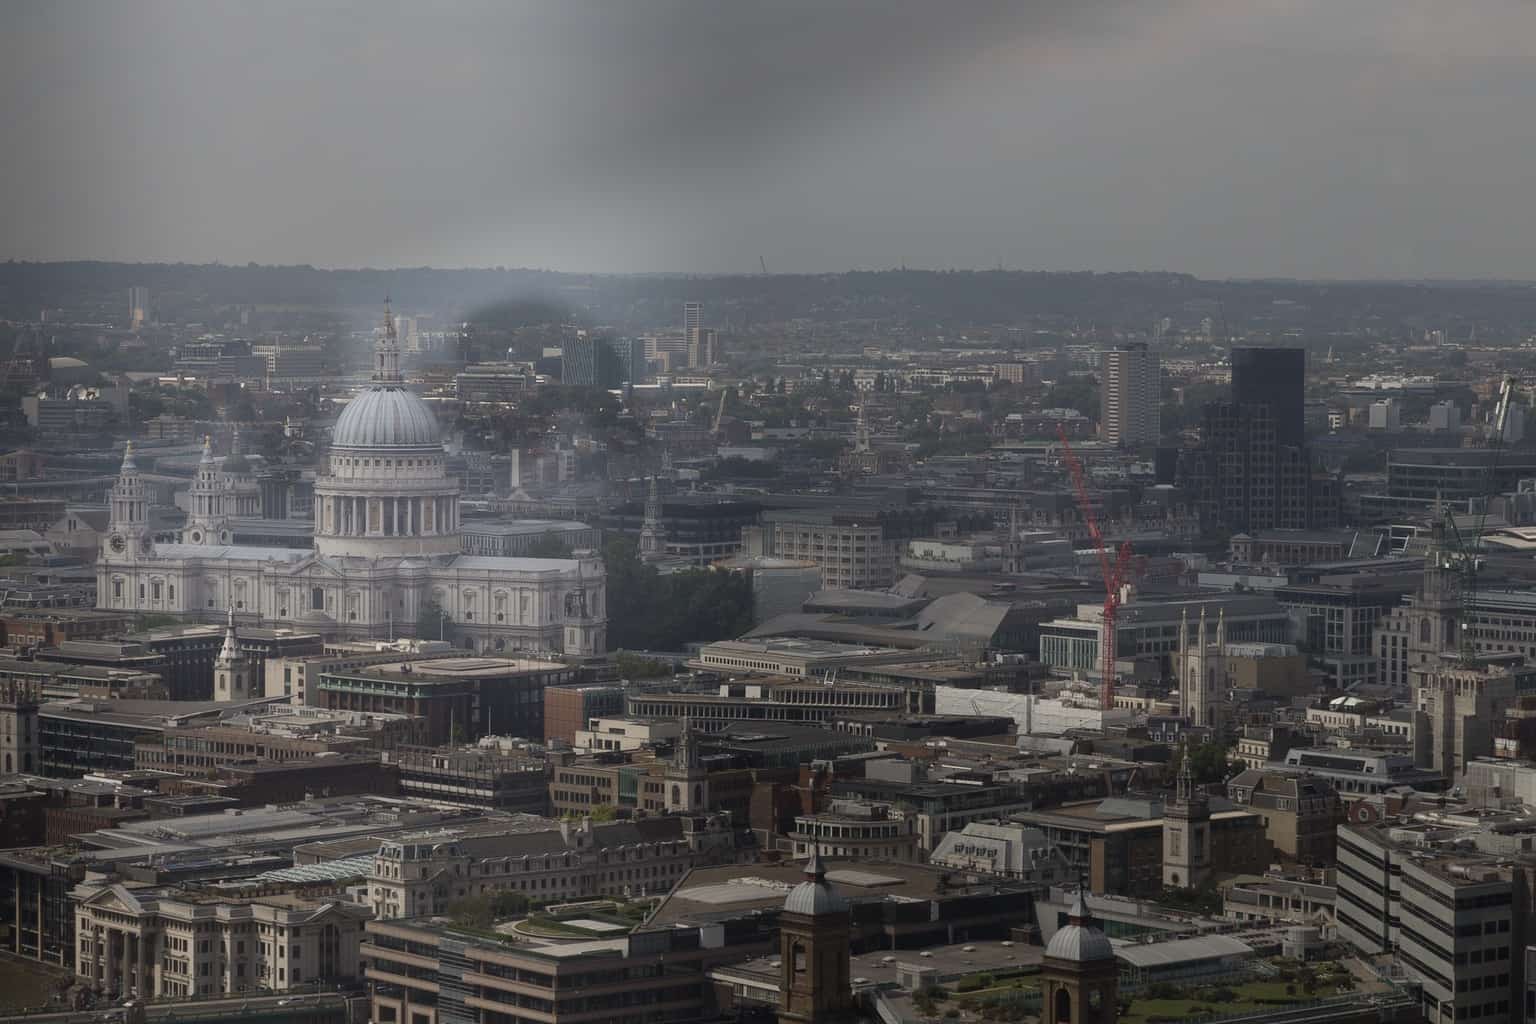  A picture of the London skyline by Rick McEvoy London photographer 